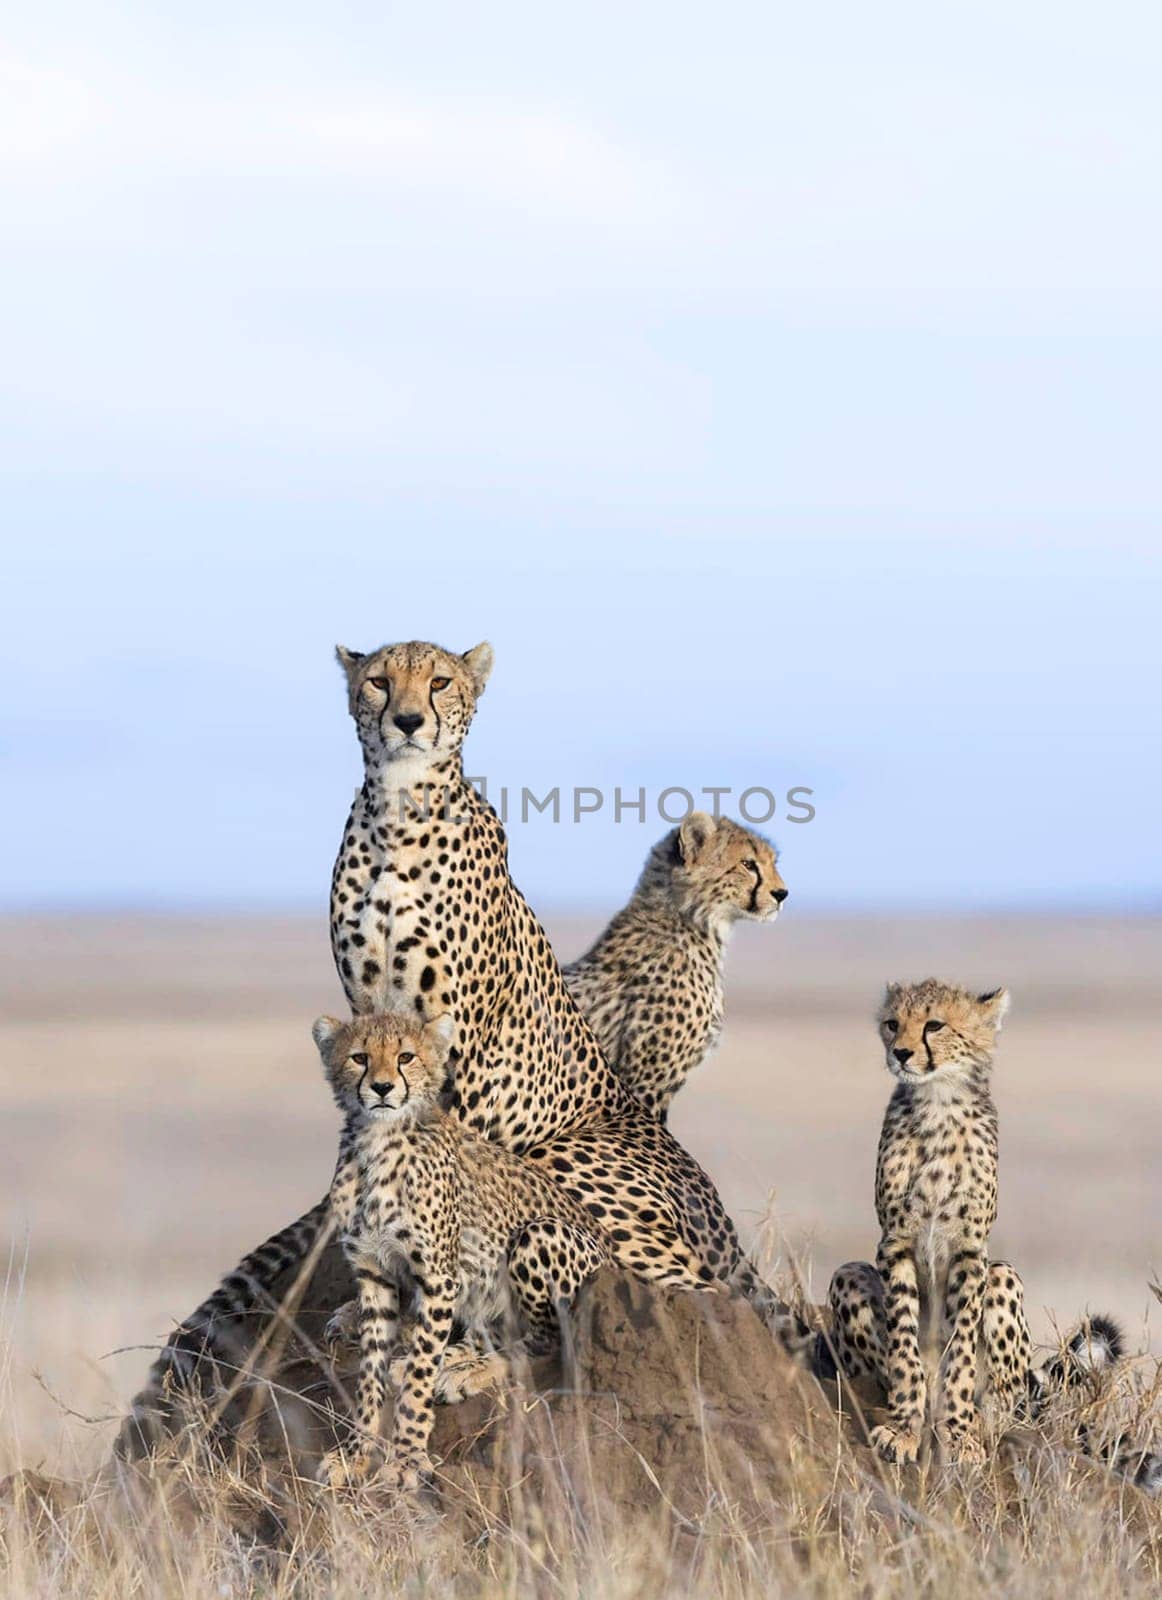 Magical Tanzania wildlife pictures by TravelSync27